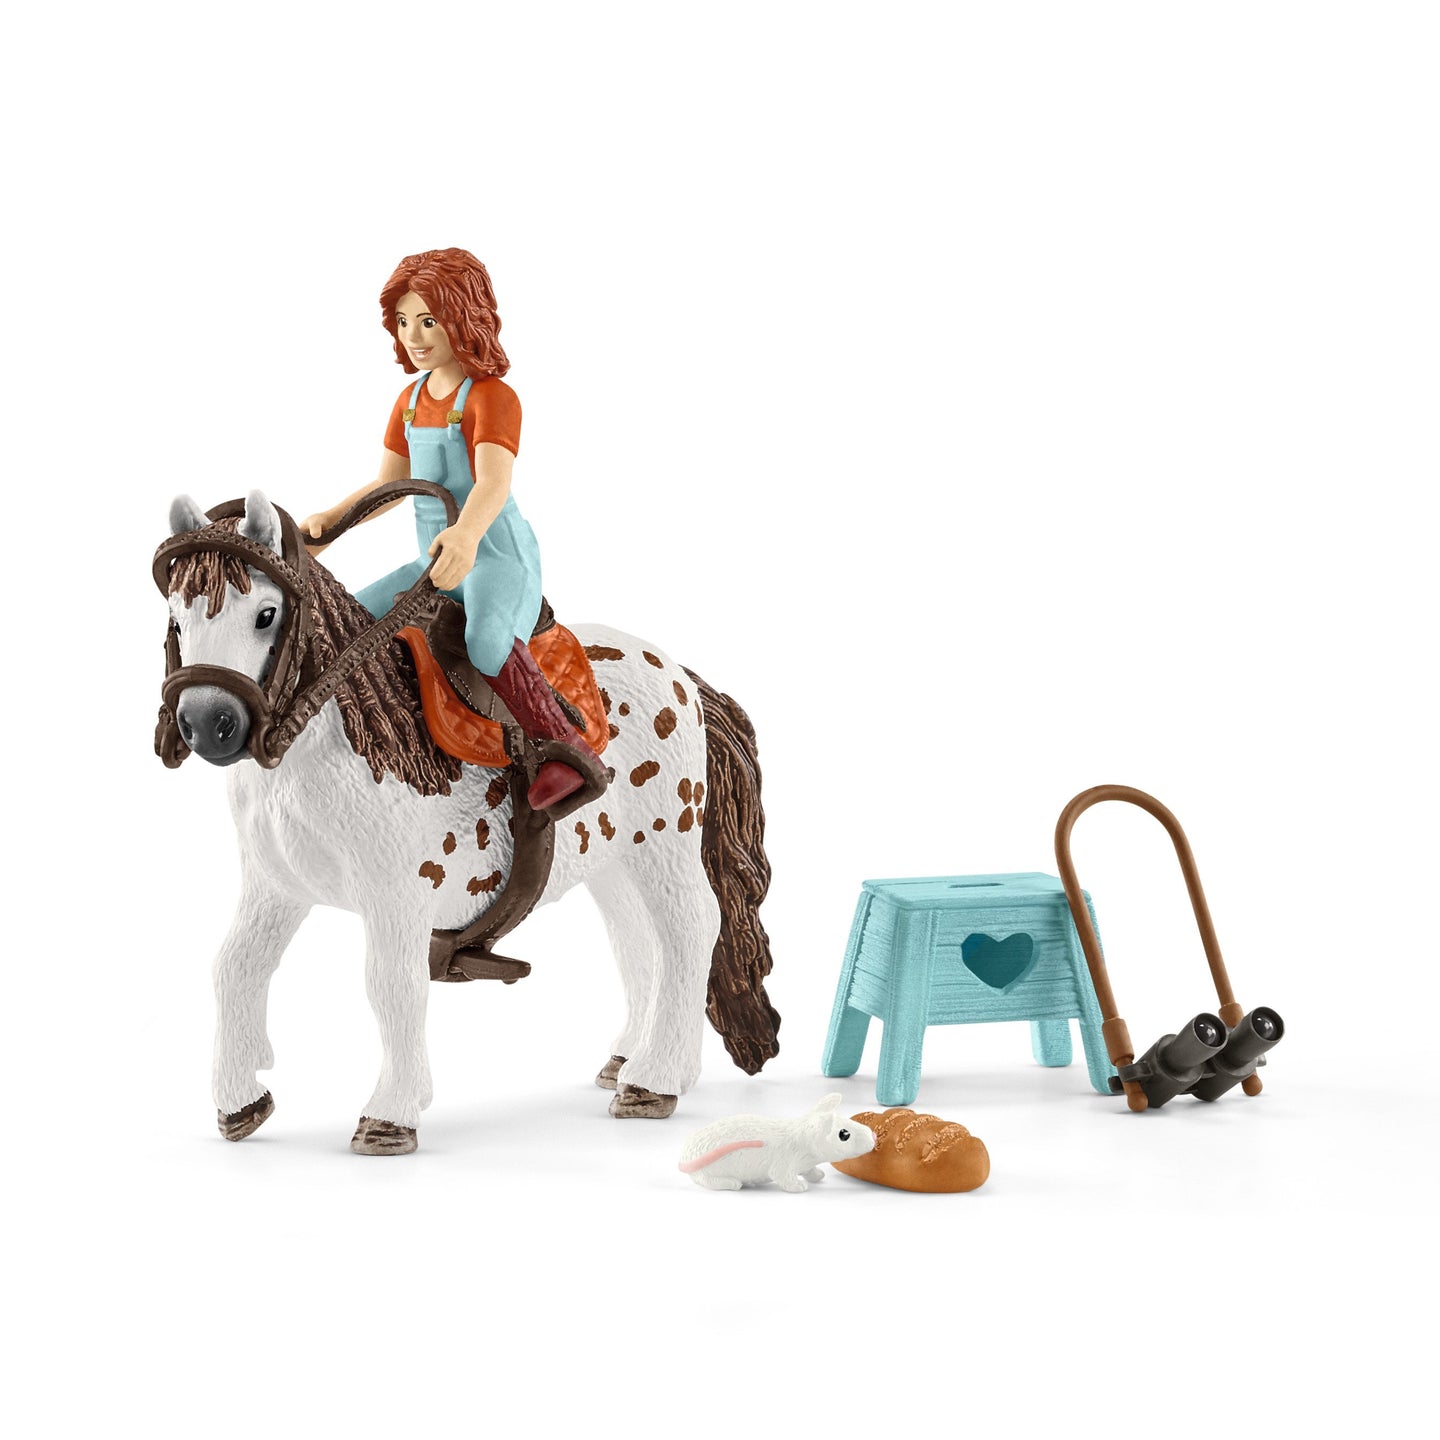 SL42518 Schleich Horse Club - Mia Figure with Horse and Accessories